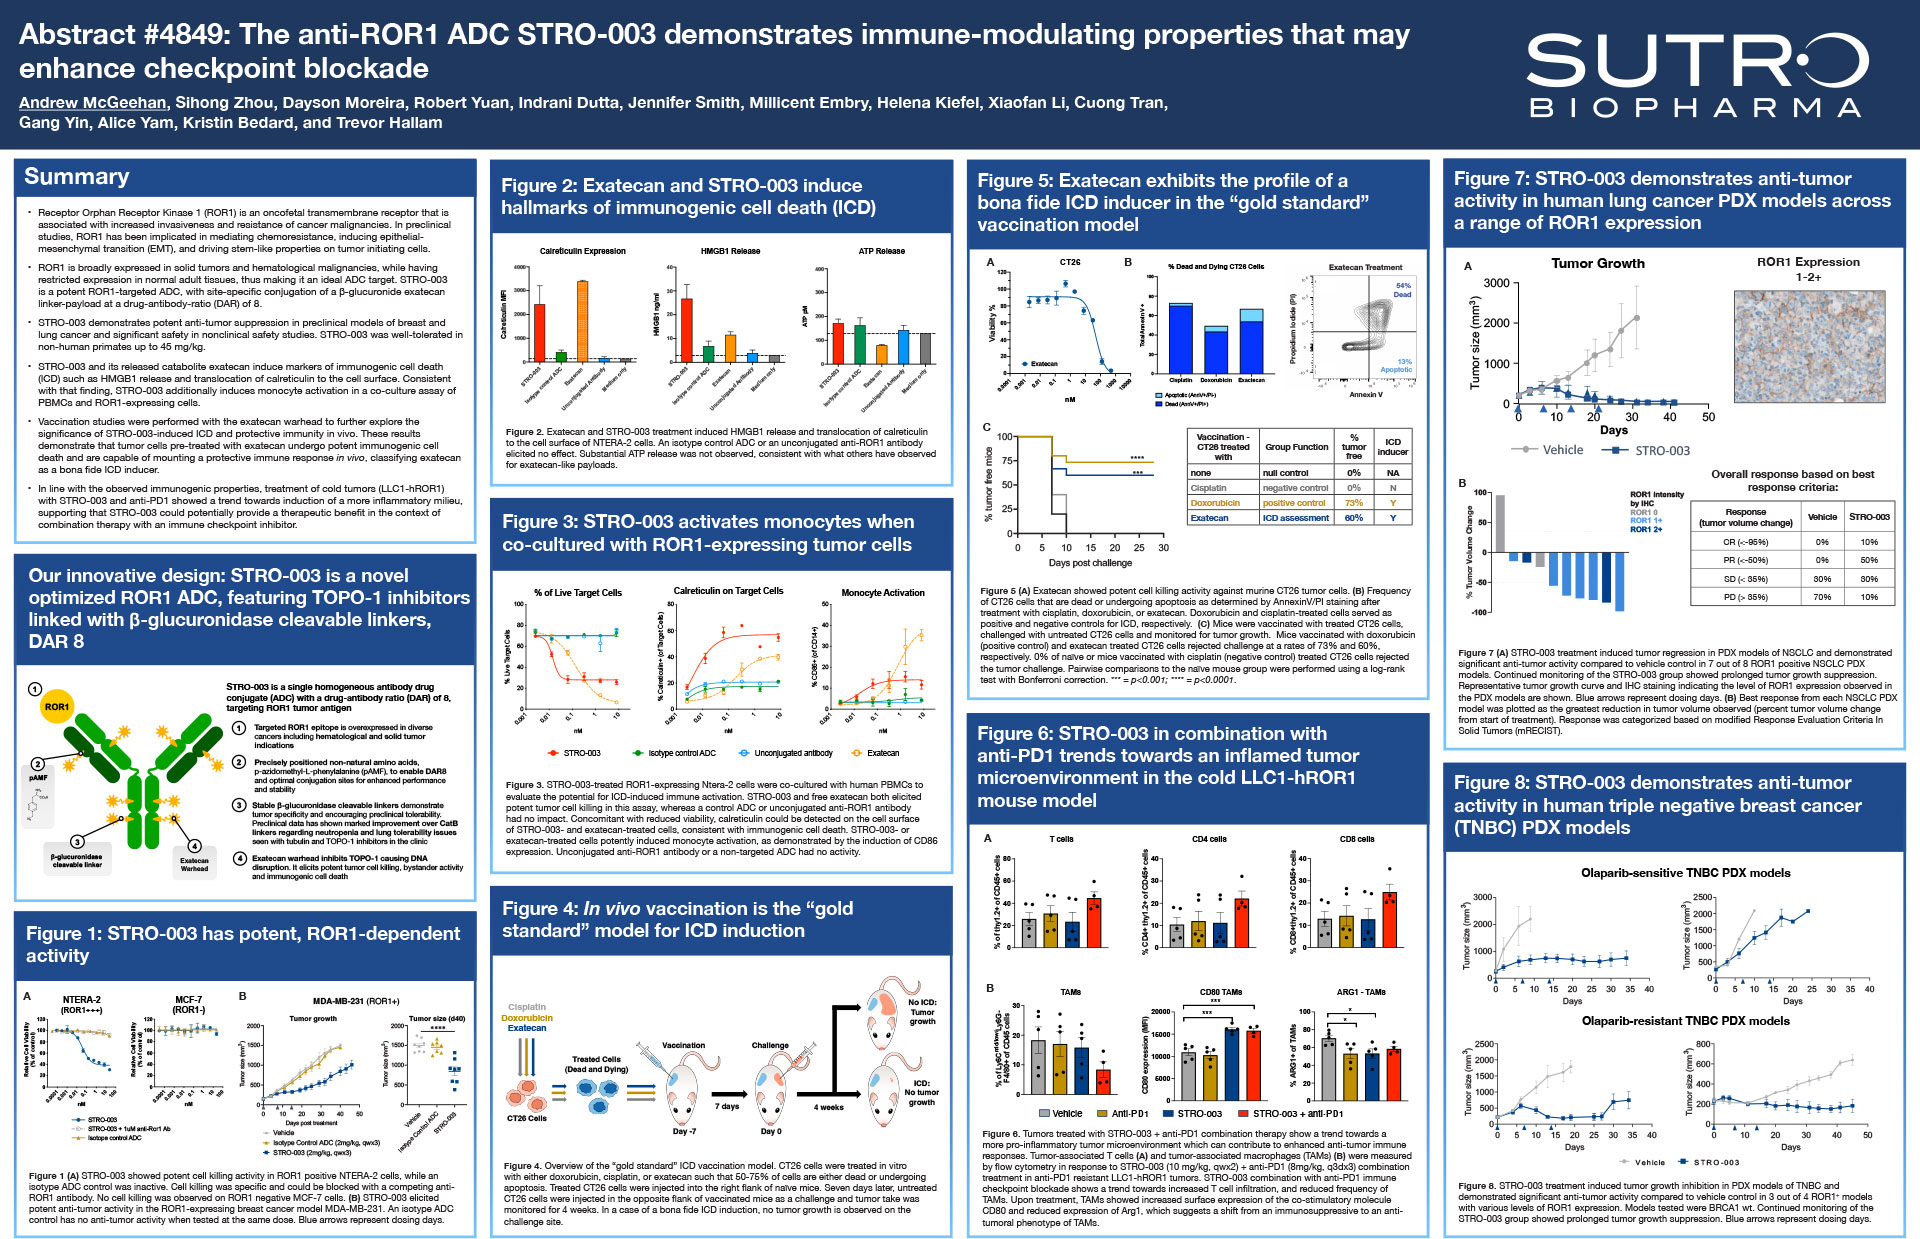 2023 American Association for Cancer Research Annual Meeting (AACR) - Poster